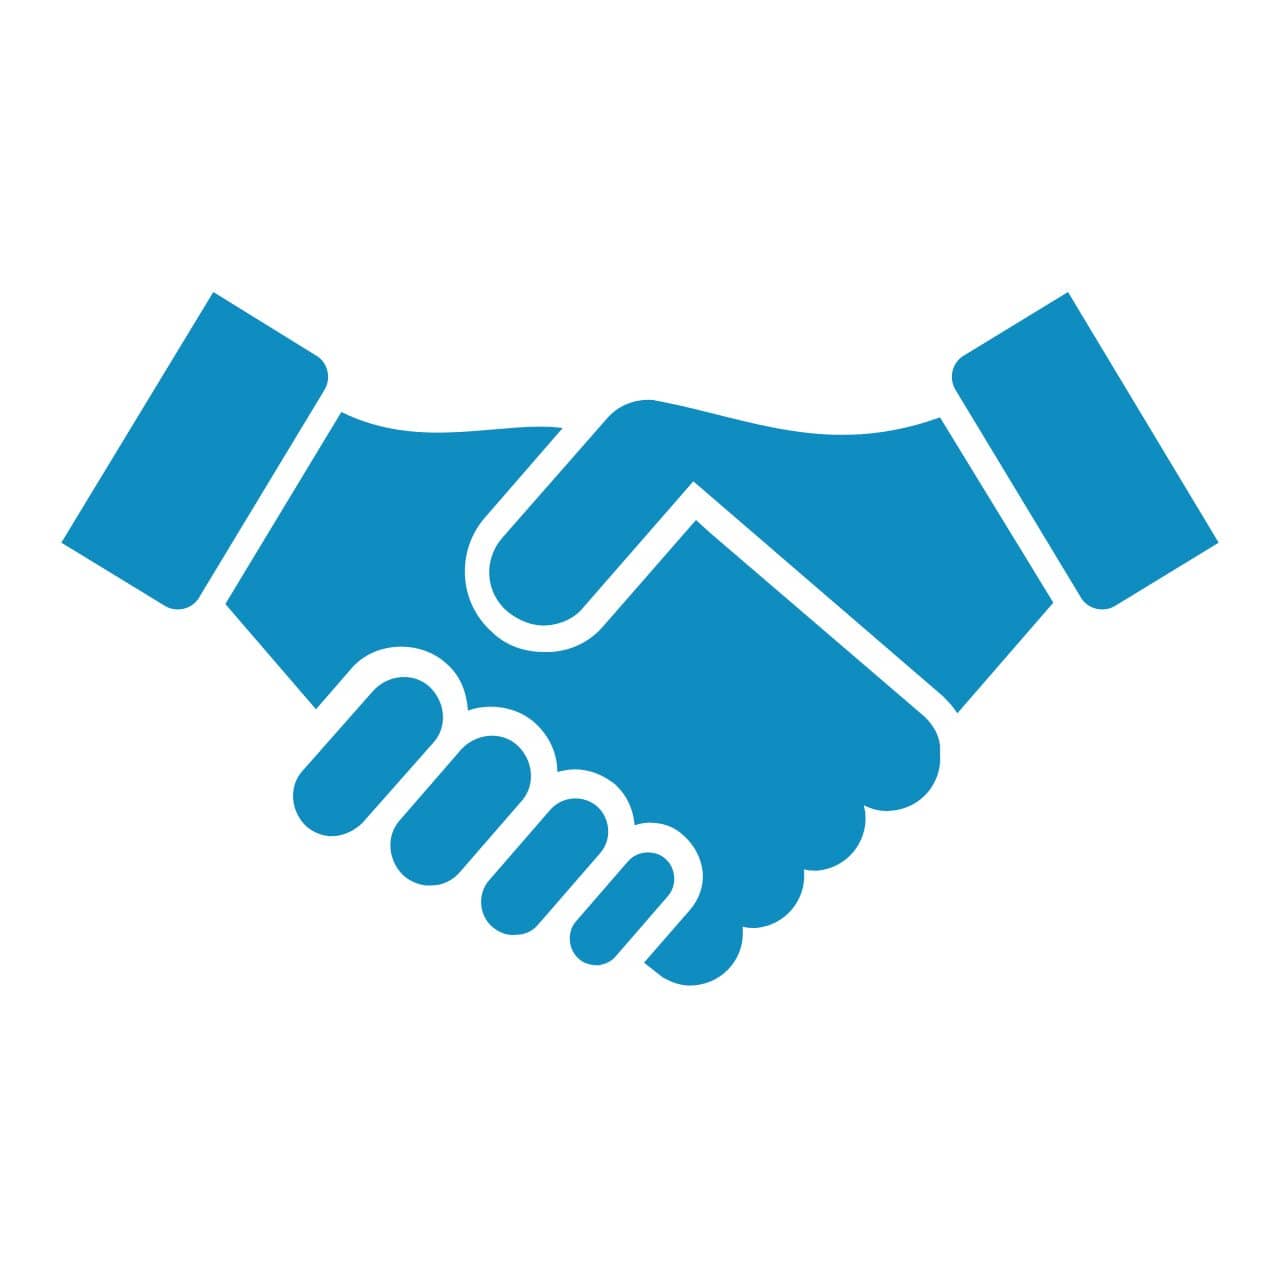 A blue icon showing two hands shaking agreeing on a job